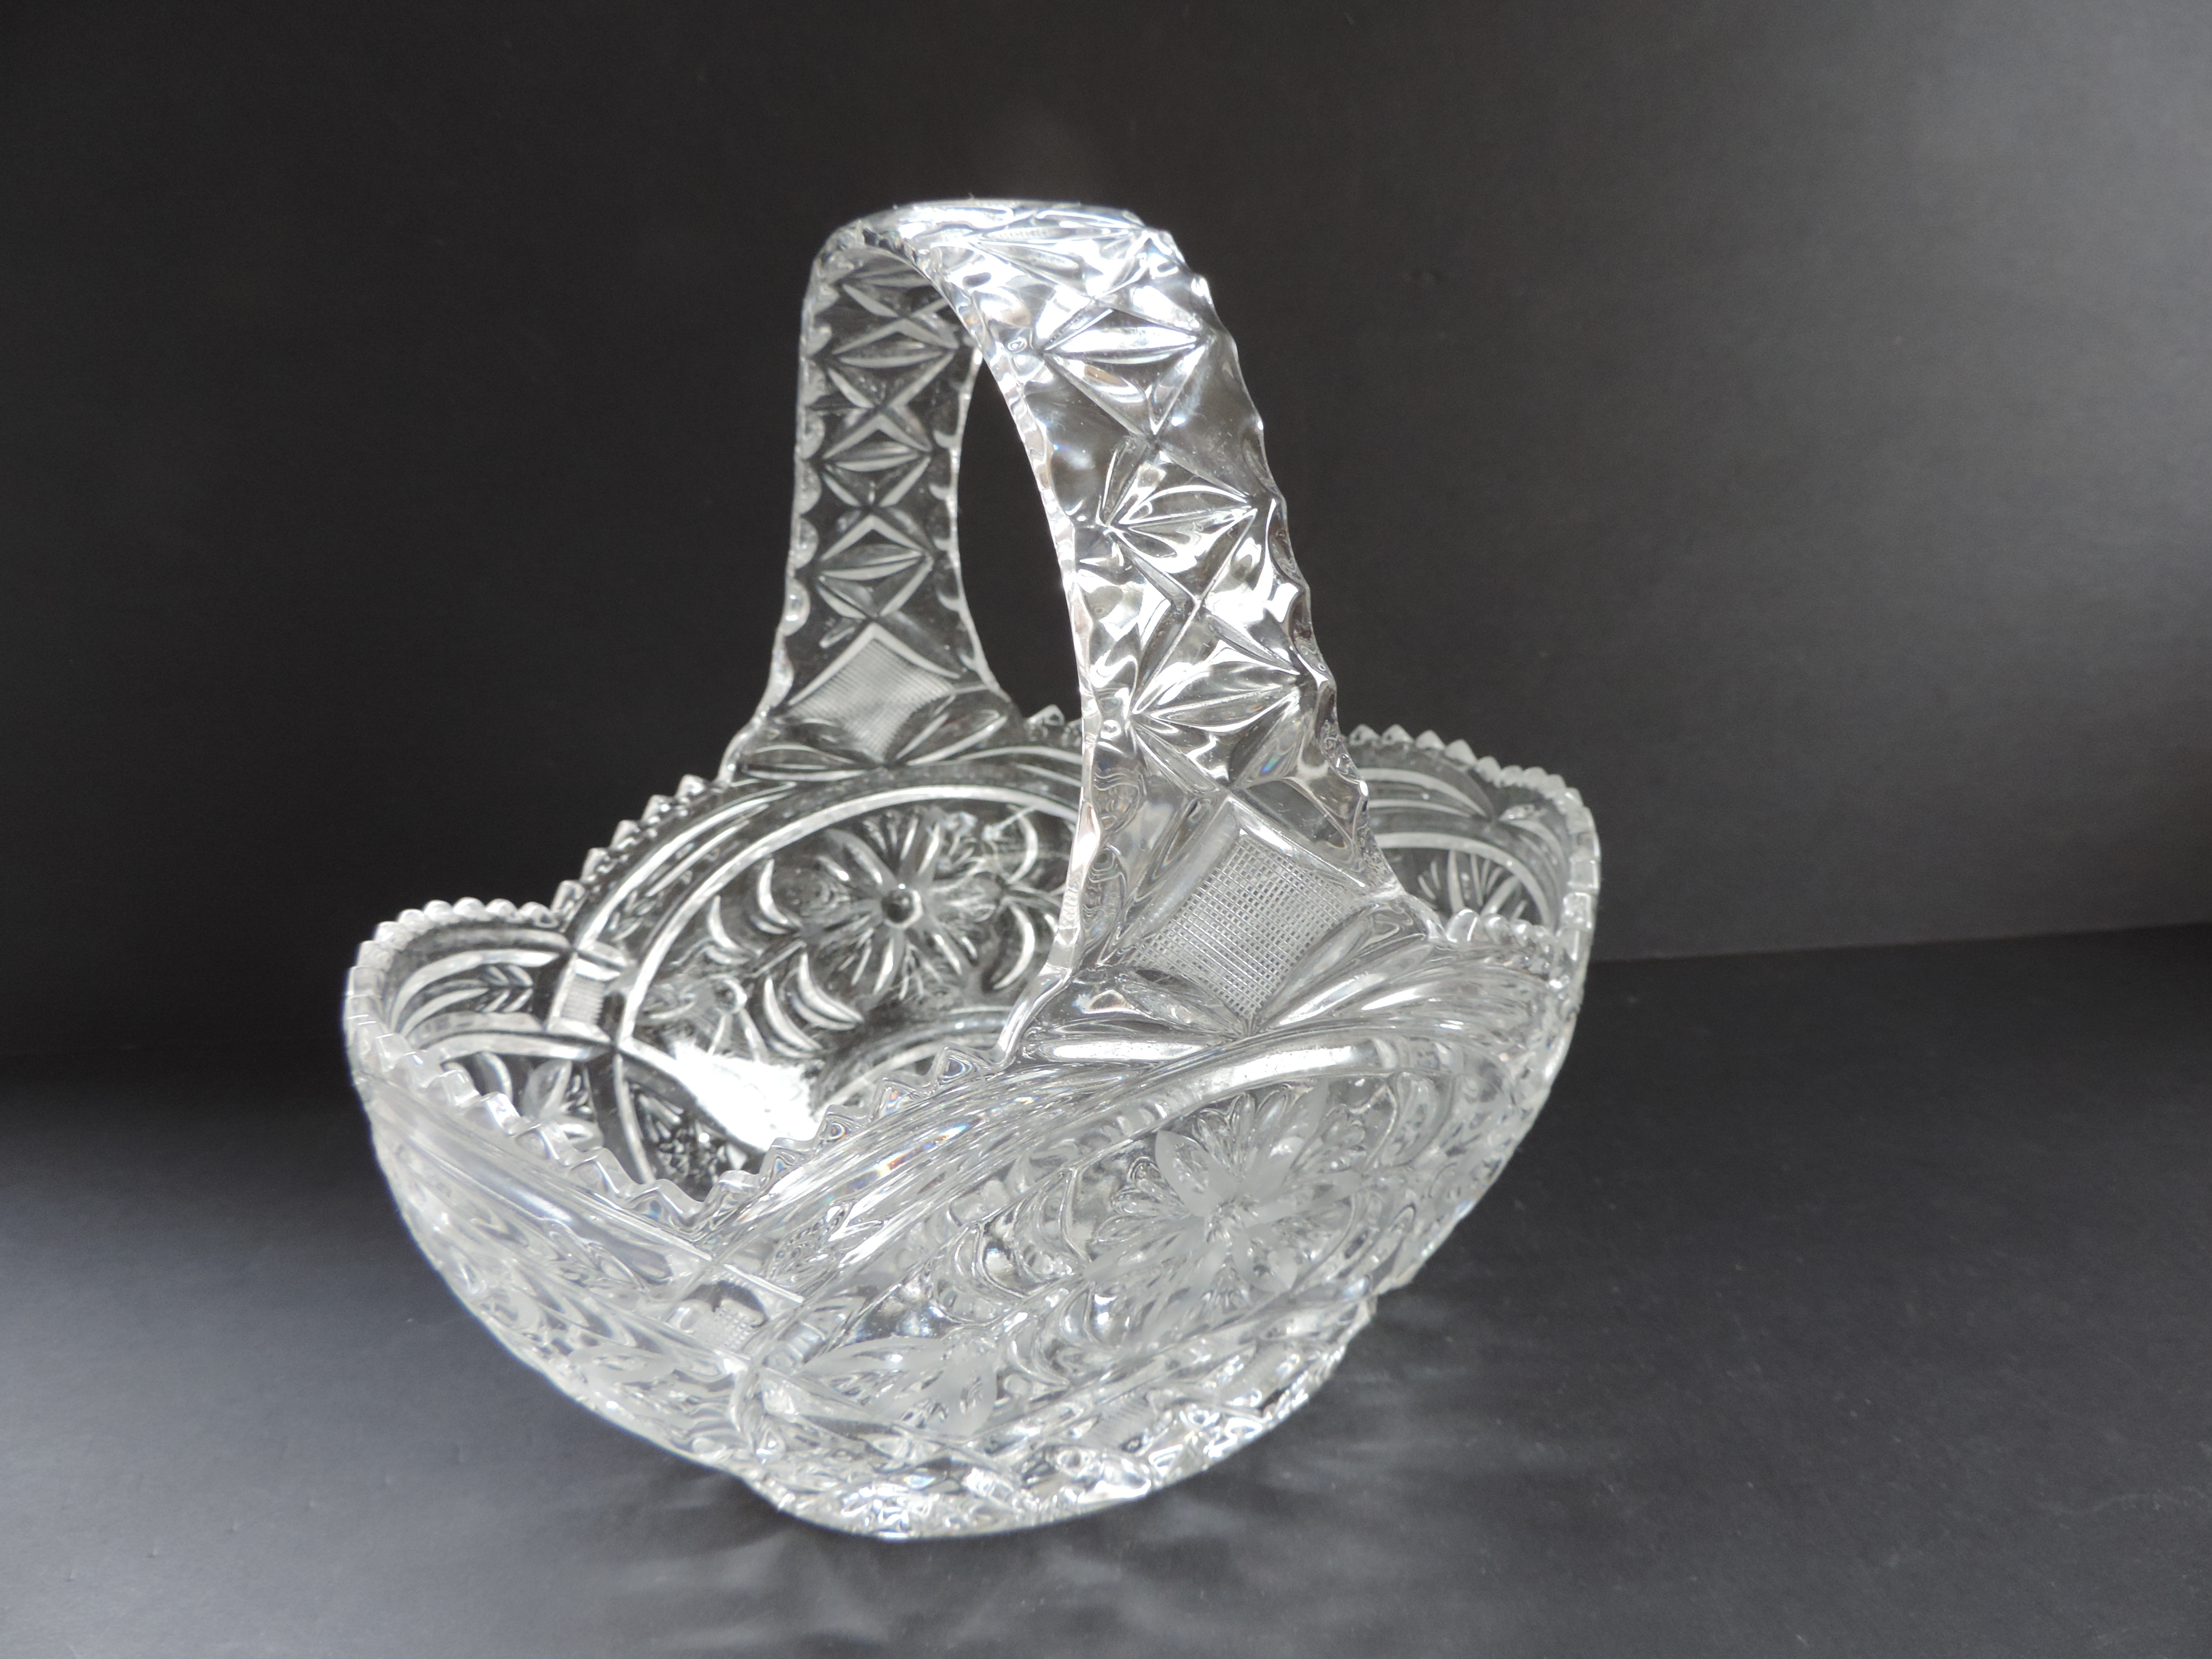 Vintage Crystal Basket for Sweets, Chocolates & Pastries - Image 2 of 3